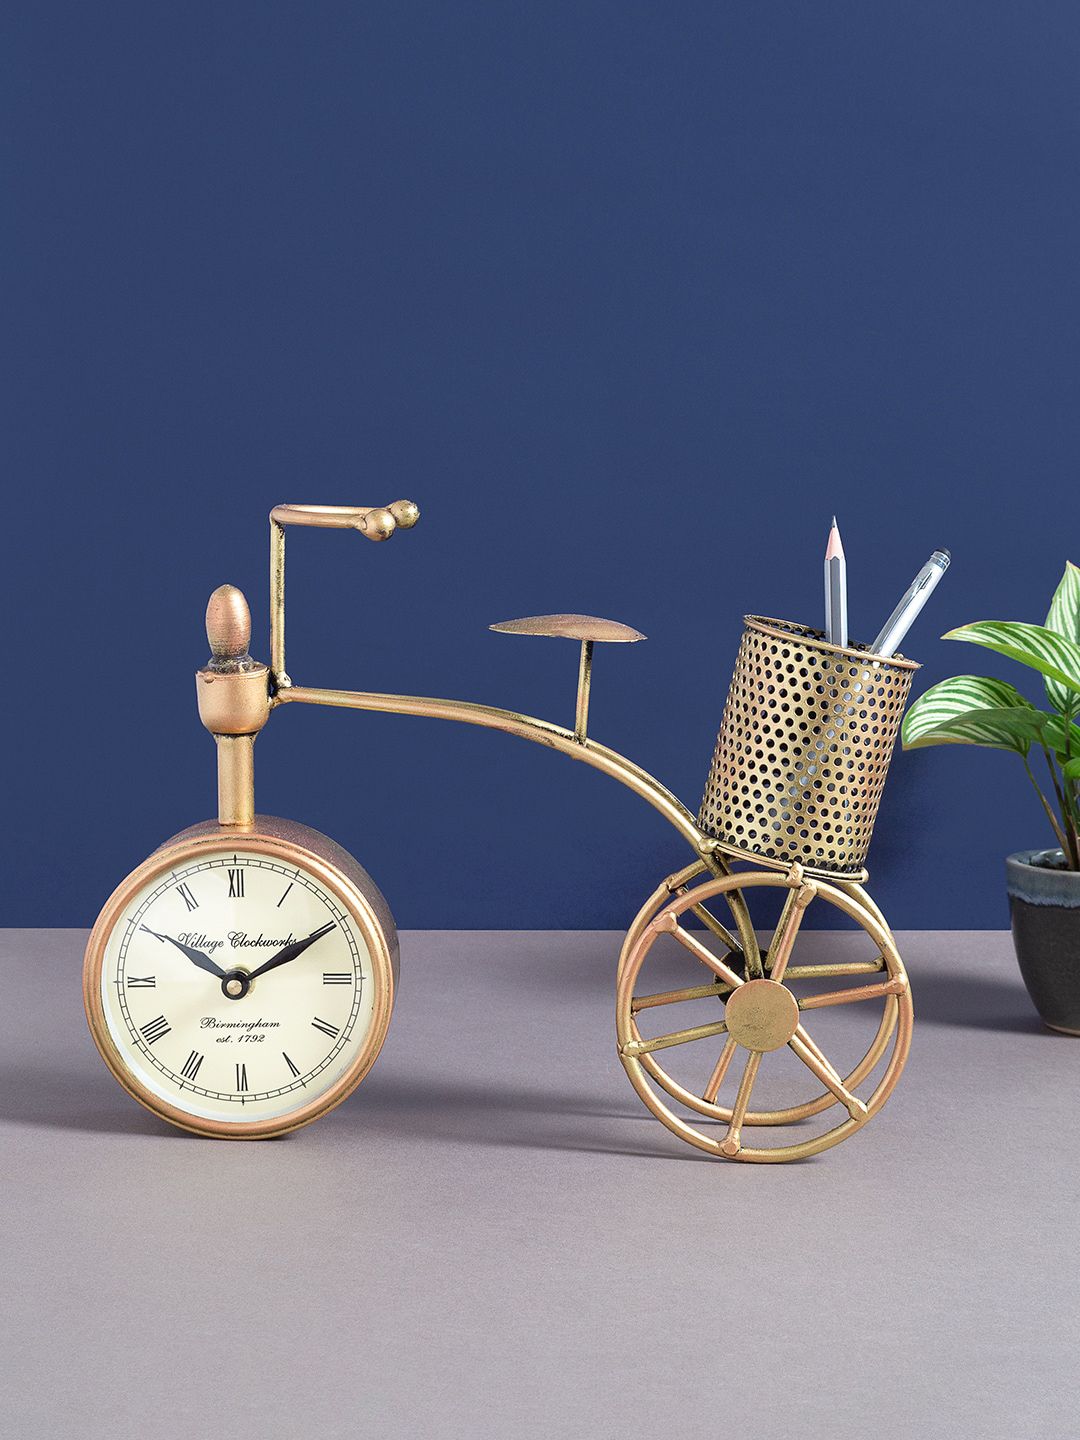 Golden Peacock Gold-Toned Cycle Design Penstand With Dial Clock Price in India